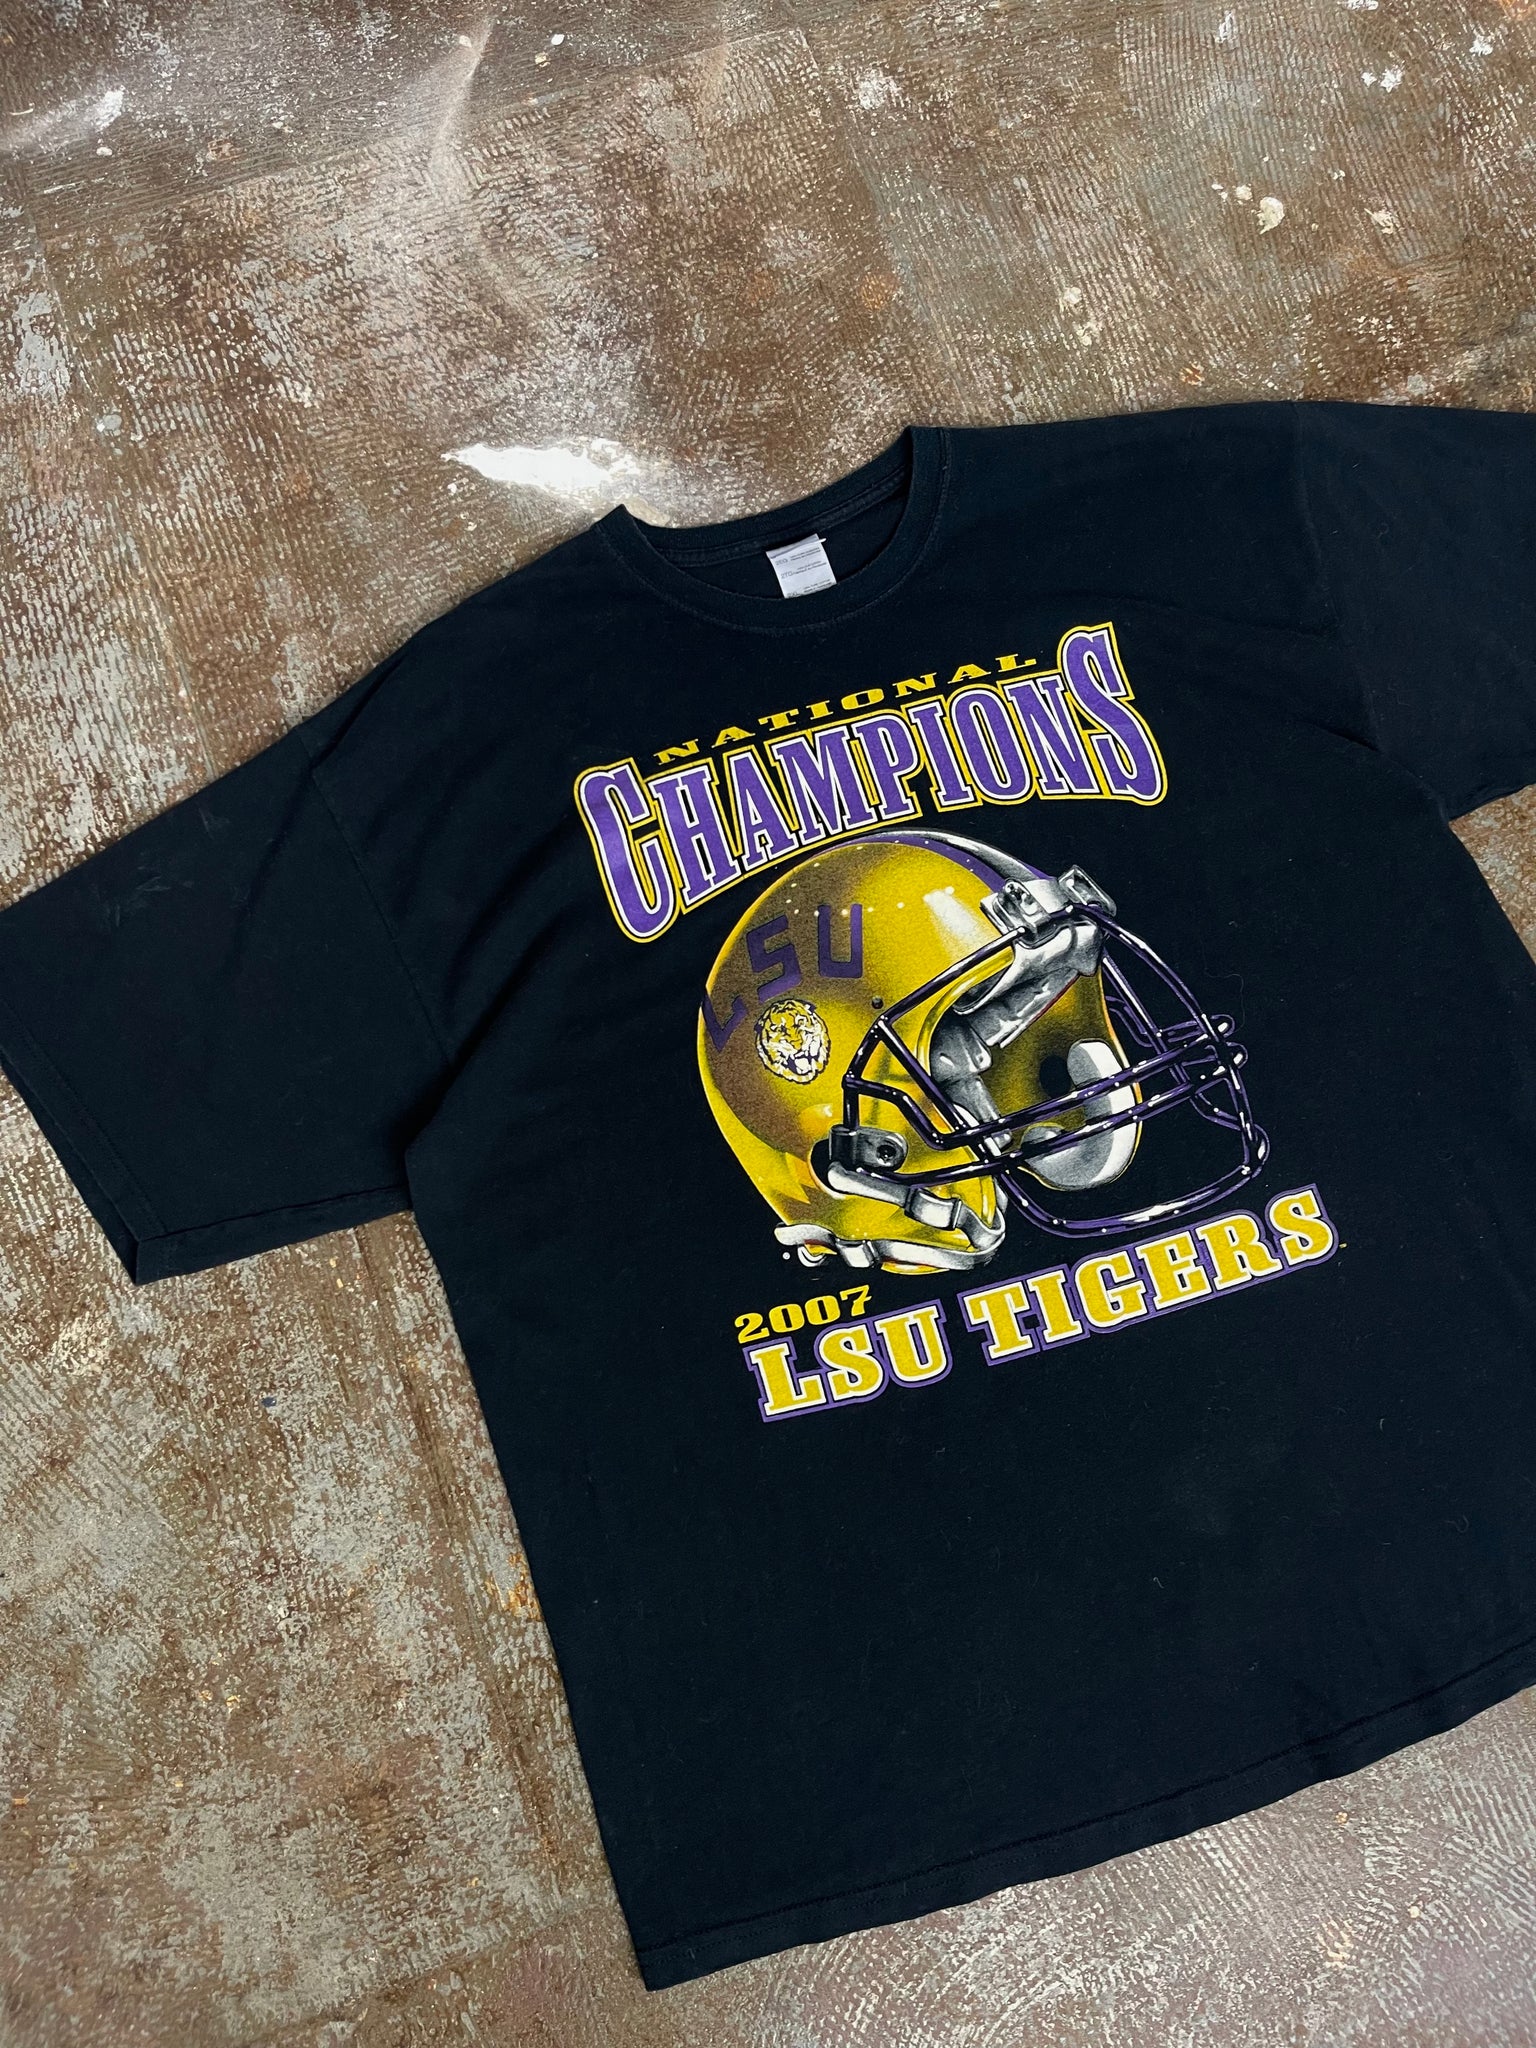 LSU TIGERS NATIONAL CHAMIONS 2007 T-SHIRT